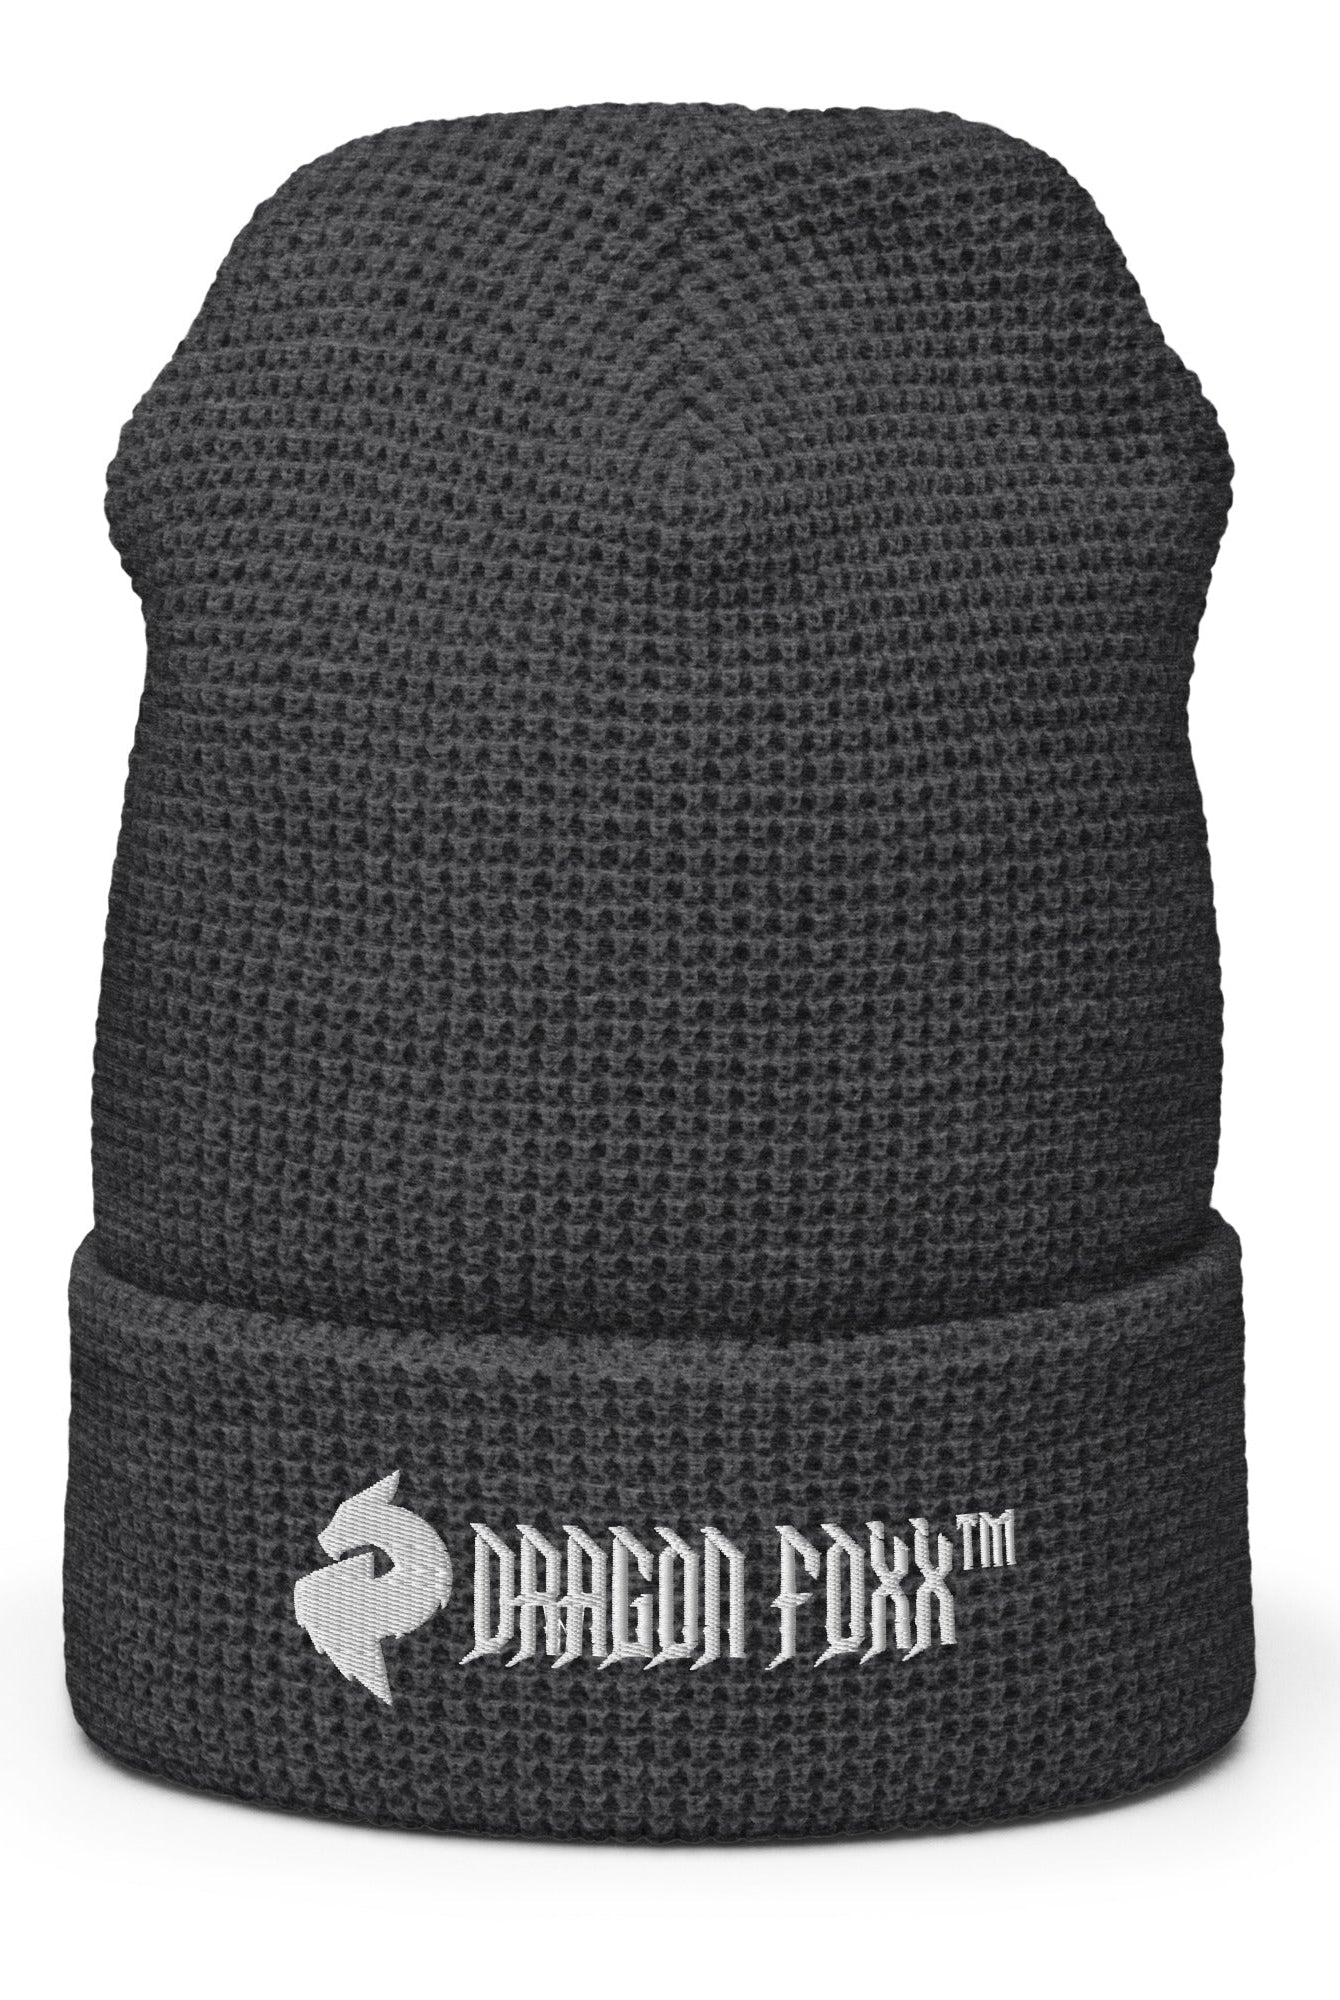 His or Hers Dragon Foxx™ Waffle beanie in 7 Colors - His or Hers Dragon Foxx™ Waffle beanie - DRAGON FOXX™ - His or Hers Dragon Foxx™ Waffle beanie in 7 Colors - 3986040_17447 - Heather Charcoal- - Accessories - Beanie - Beanies